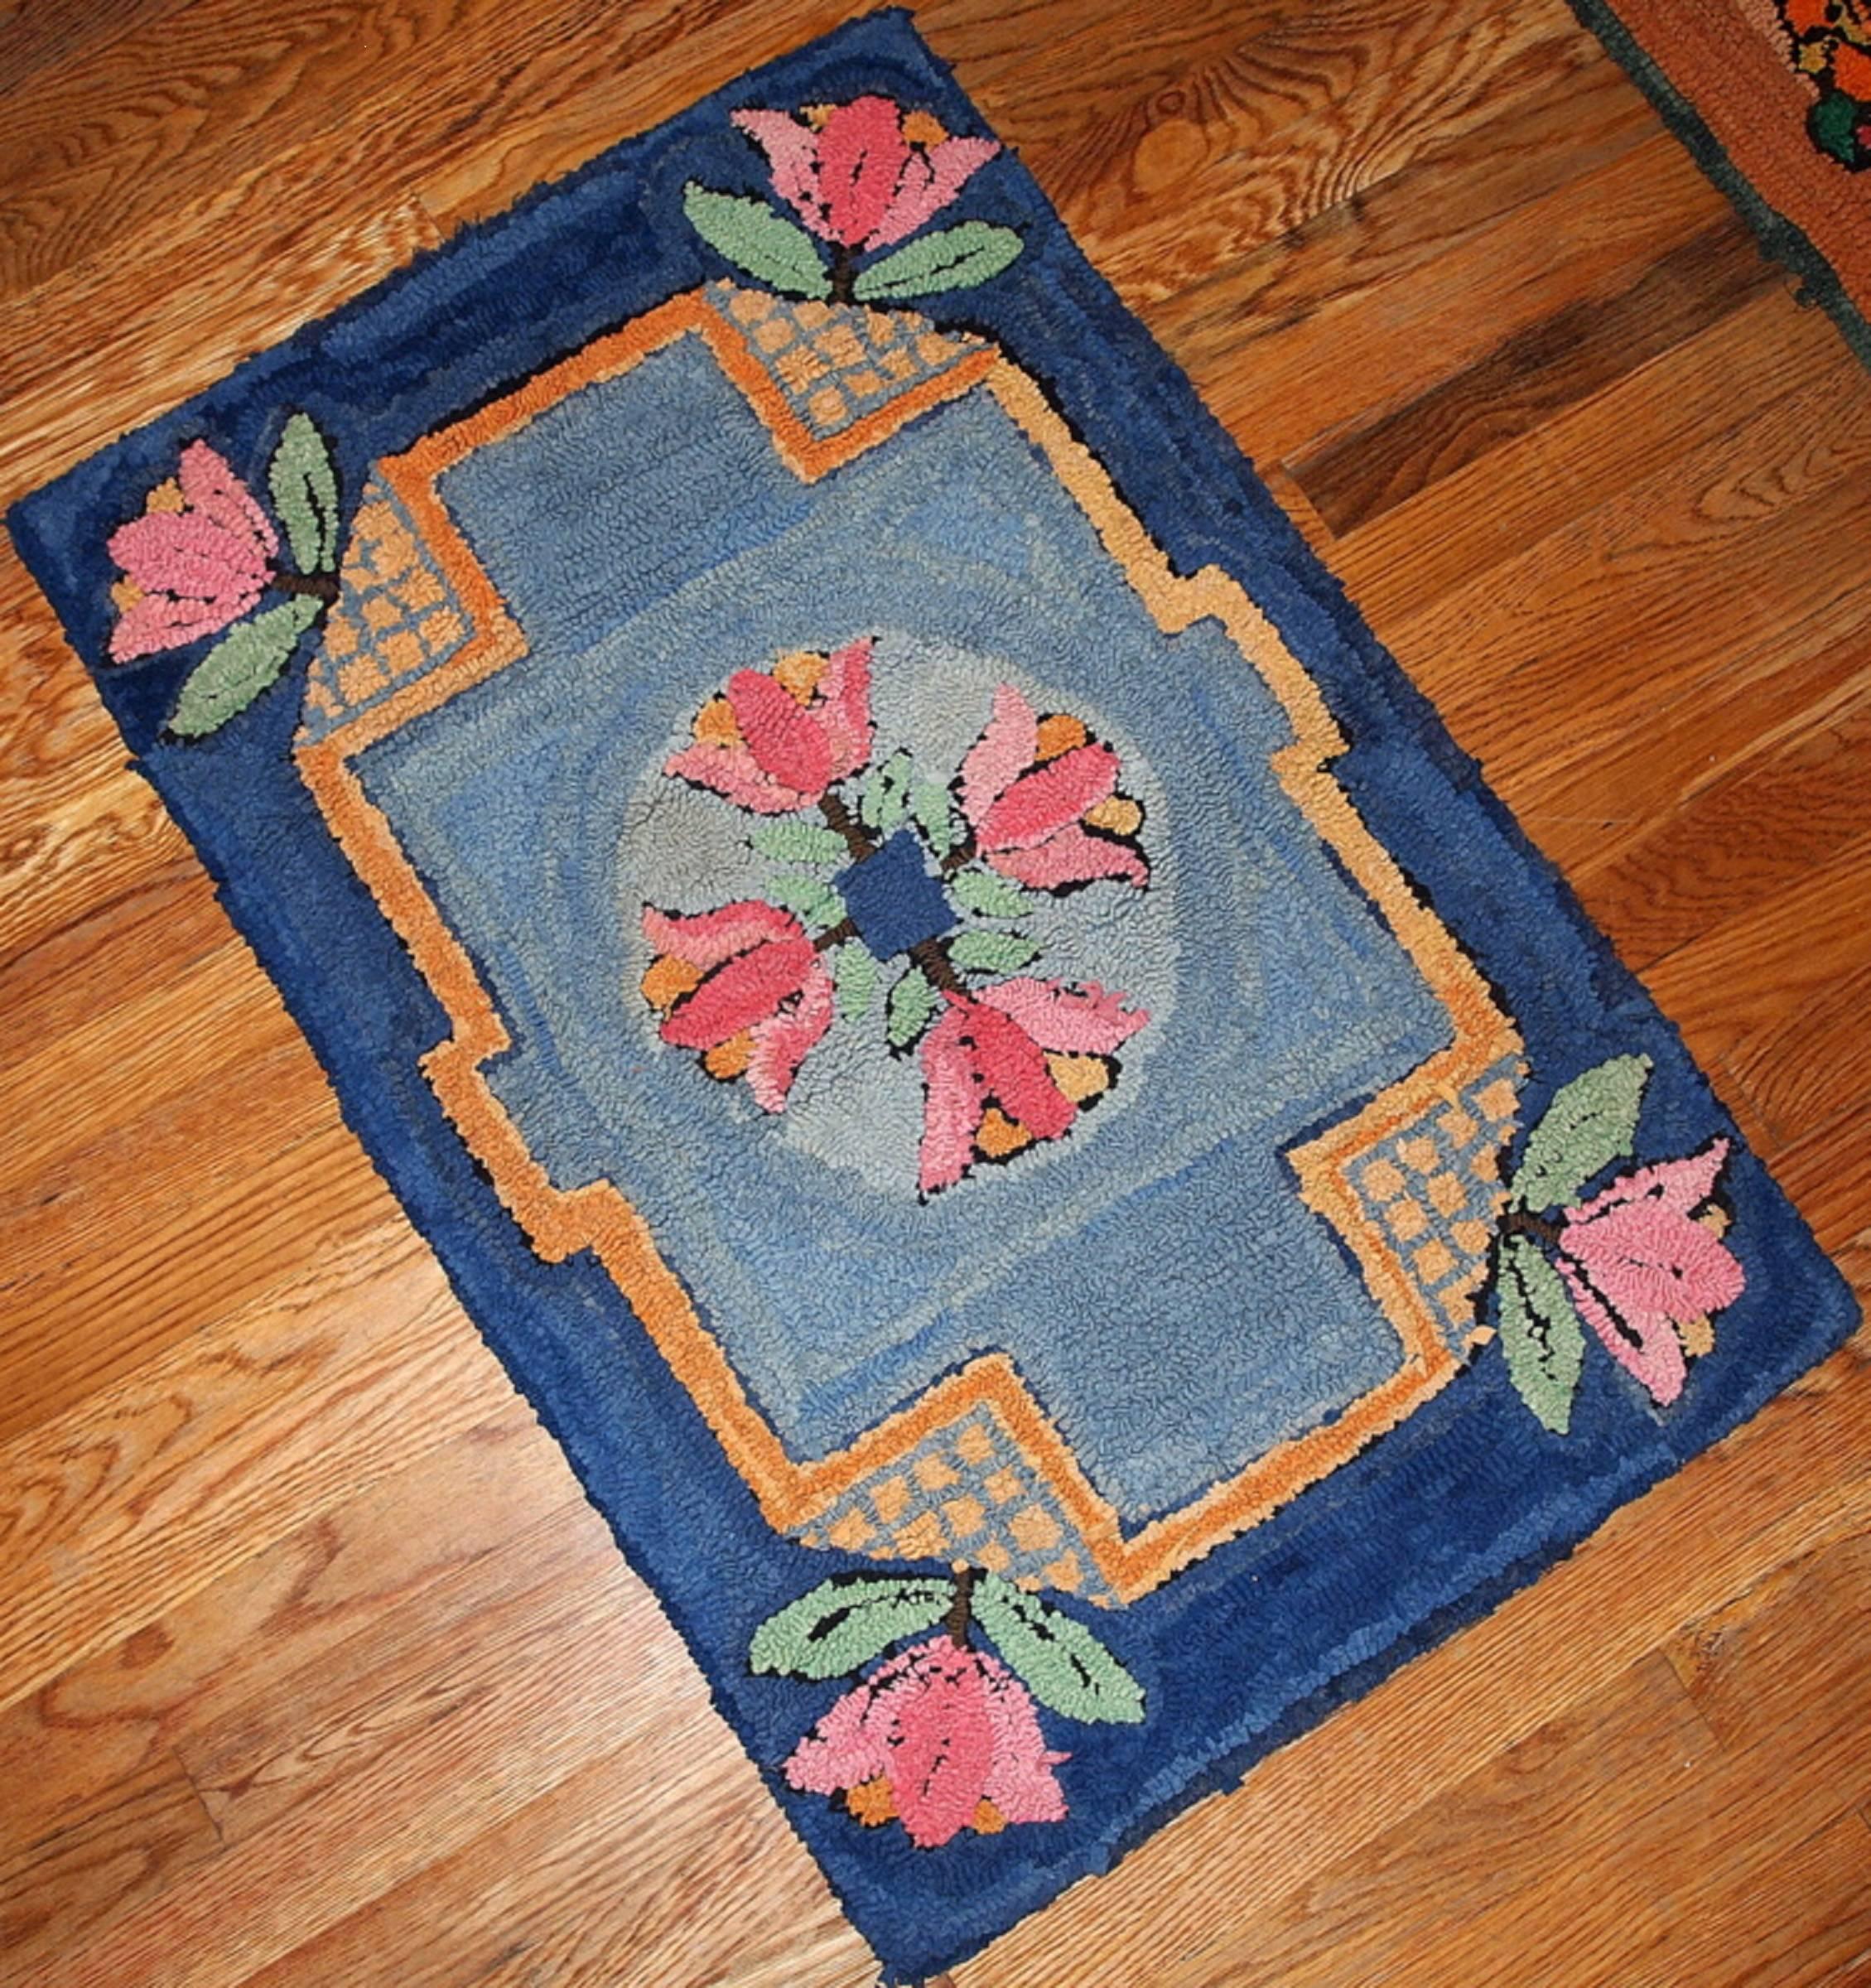 Vintage American hooked rug in combination of two different shades of blue. Dark sea blue border with pink flowers in each corner of it. Smaller inner border is in orange color and geometric shape. Sky blue field with four pink/yellow flowers in the